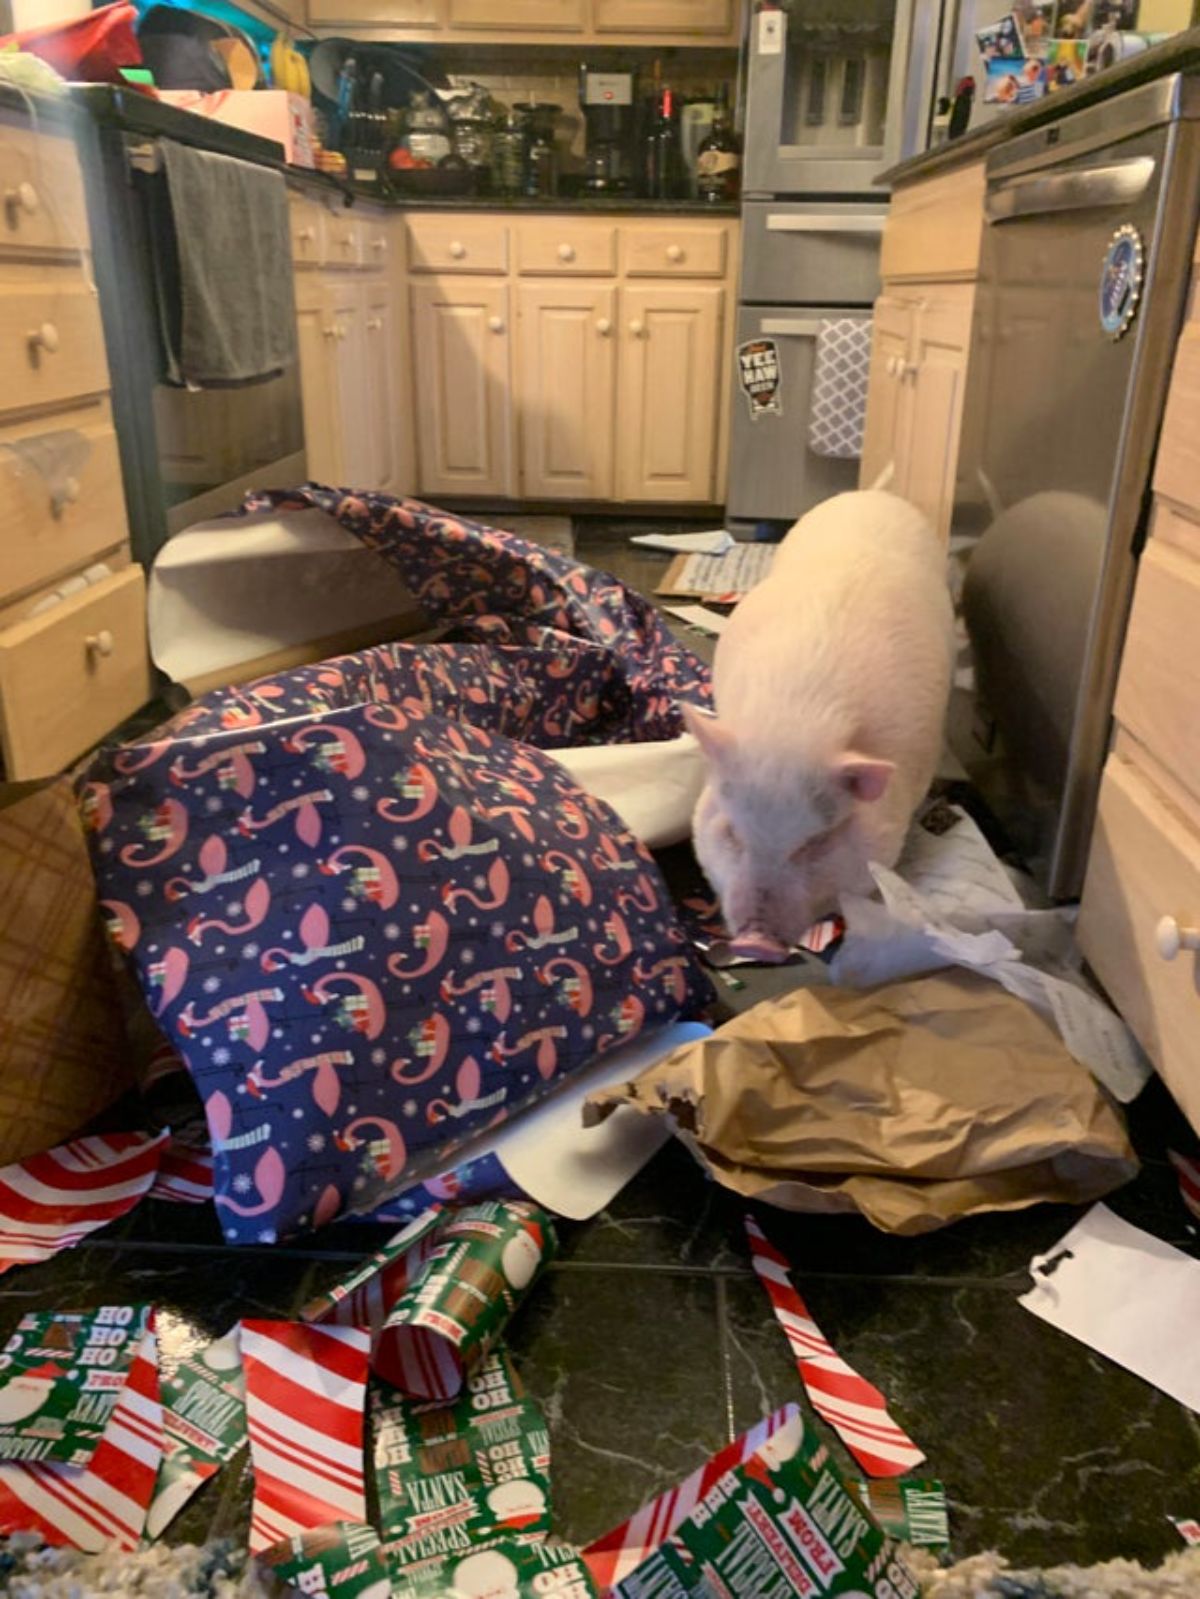 white pig standing in a kitchen surorunded by different kinds of wrapping paper